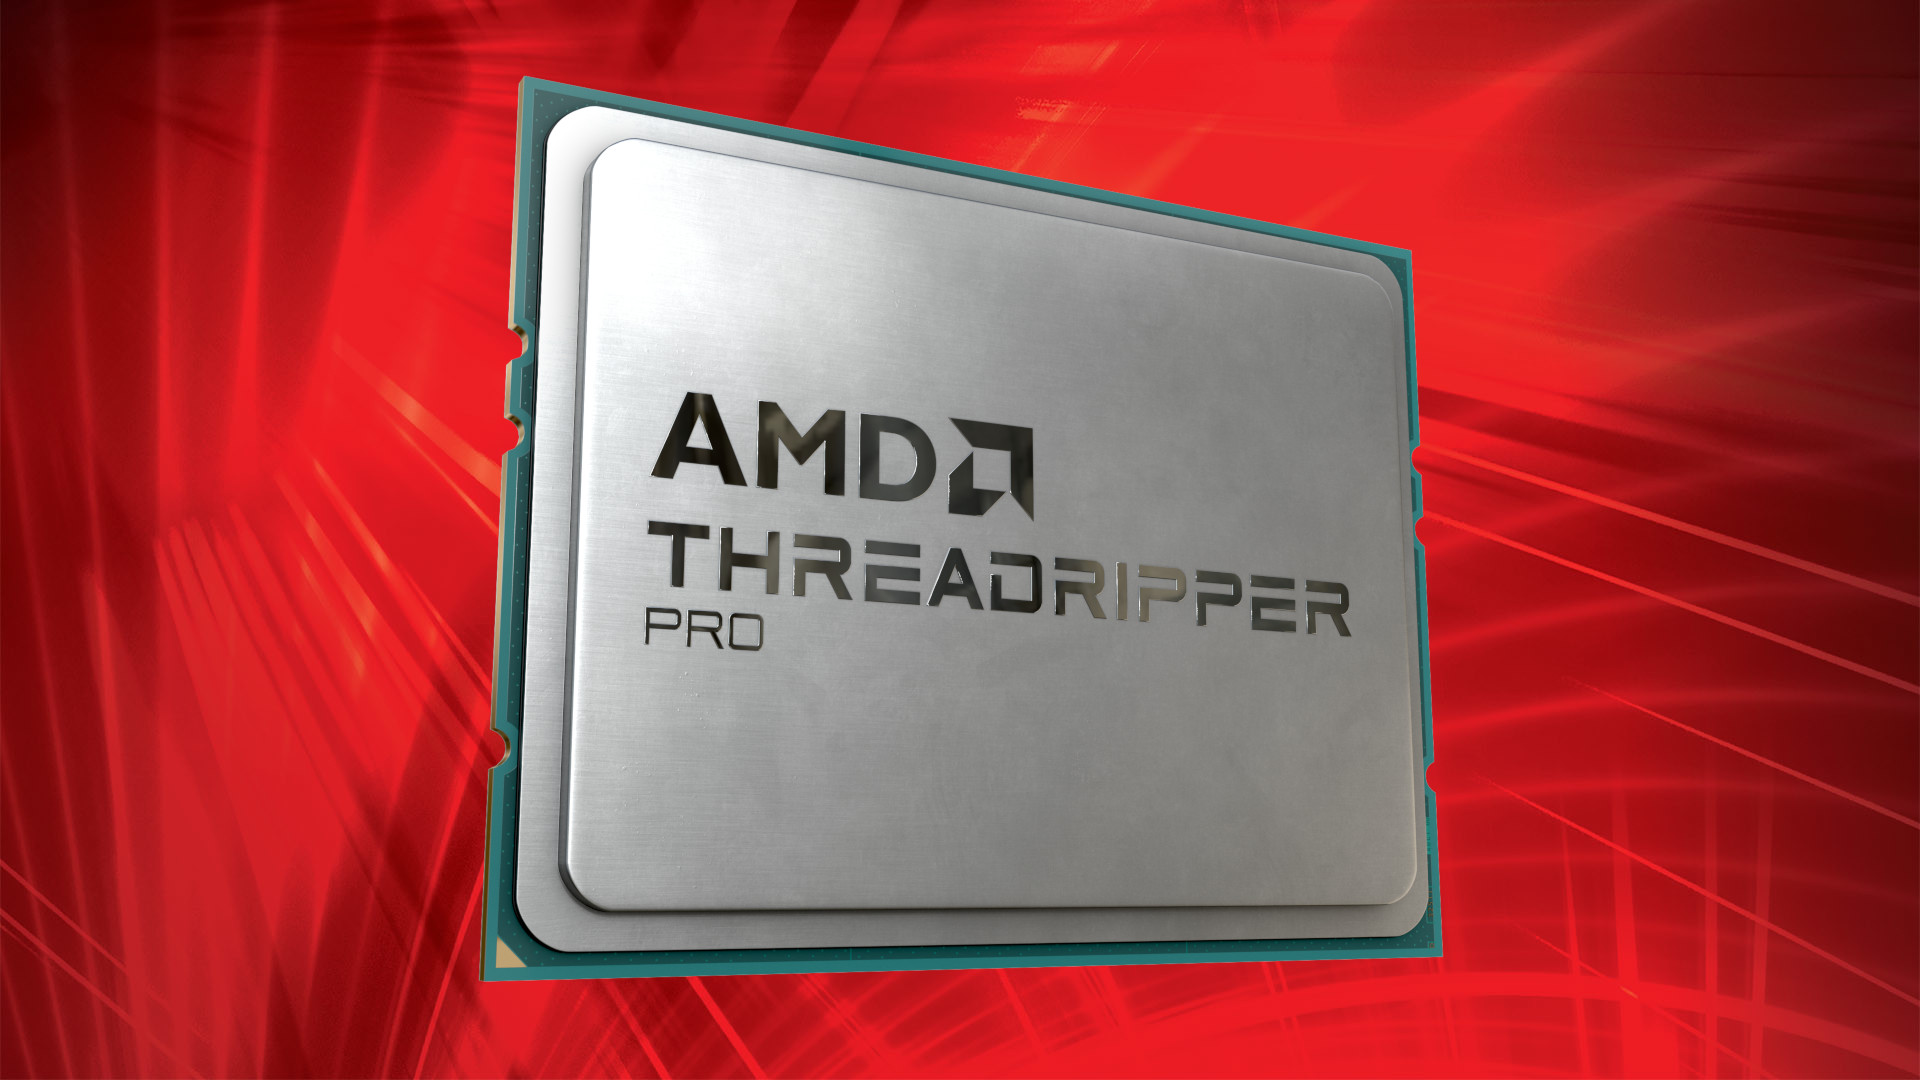 AMD Threadripper Pro 7000 release date imminent, according to new leak